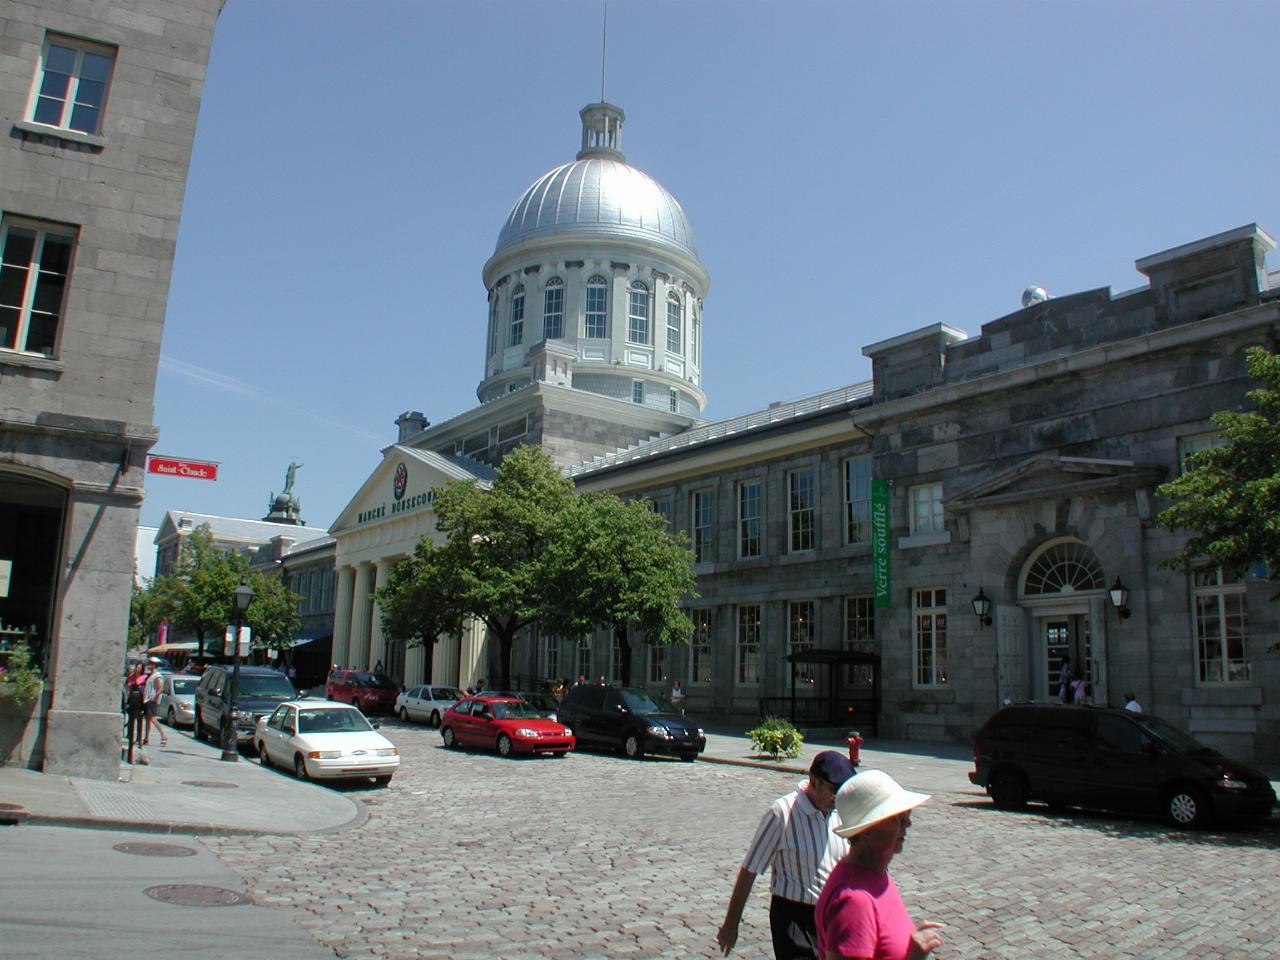 Bonsecours Market, originally a market, now used for exhibitions and craft stores